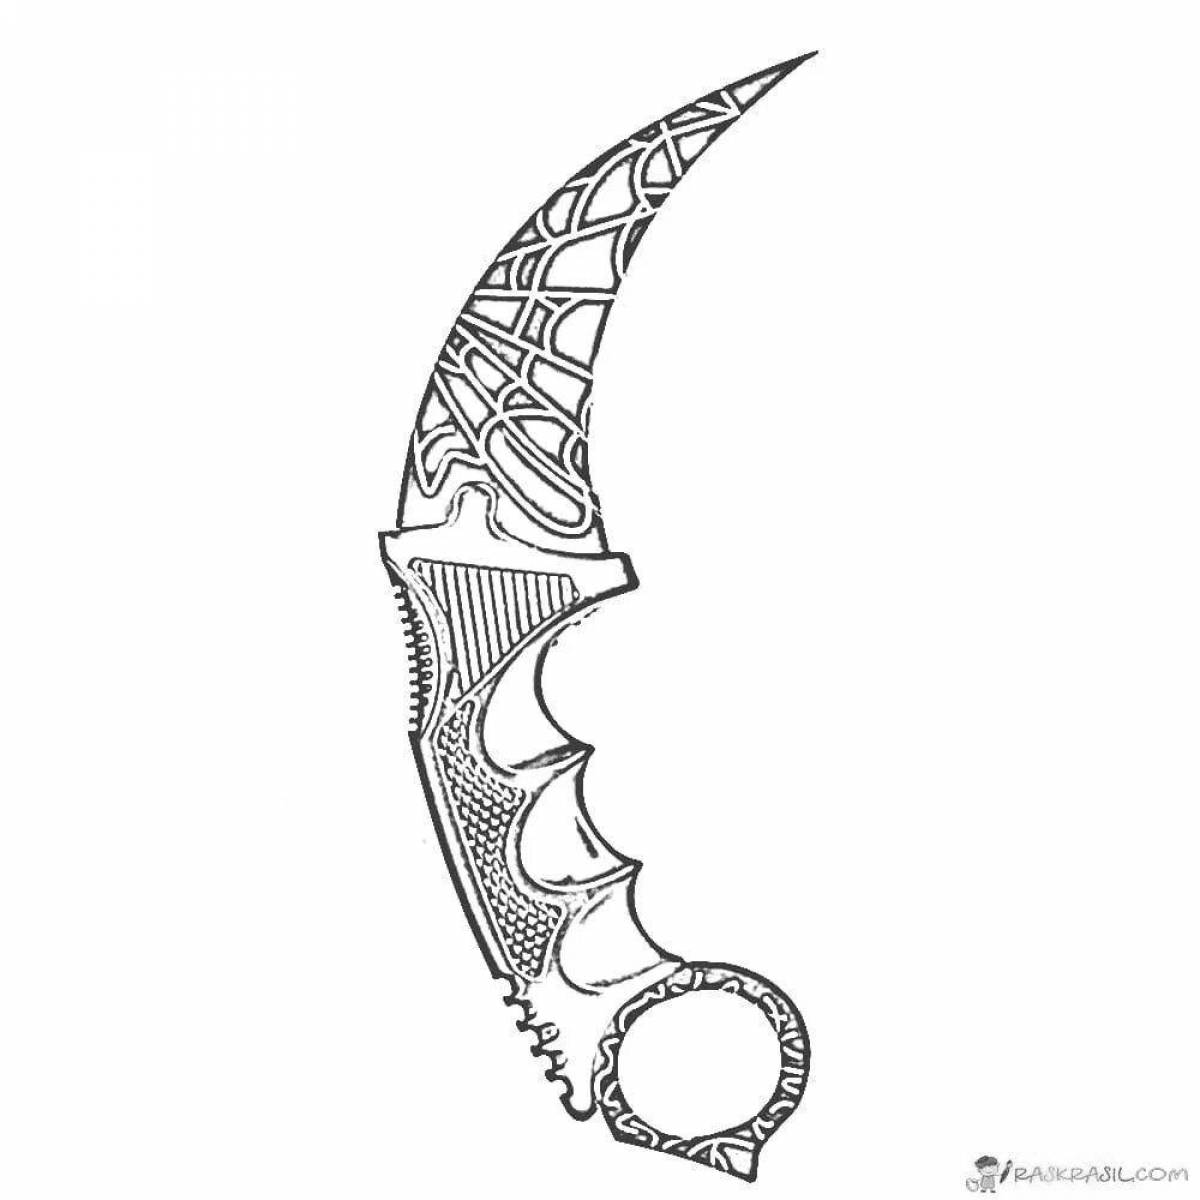 Majestic coloring page stands 2 knives